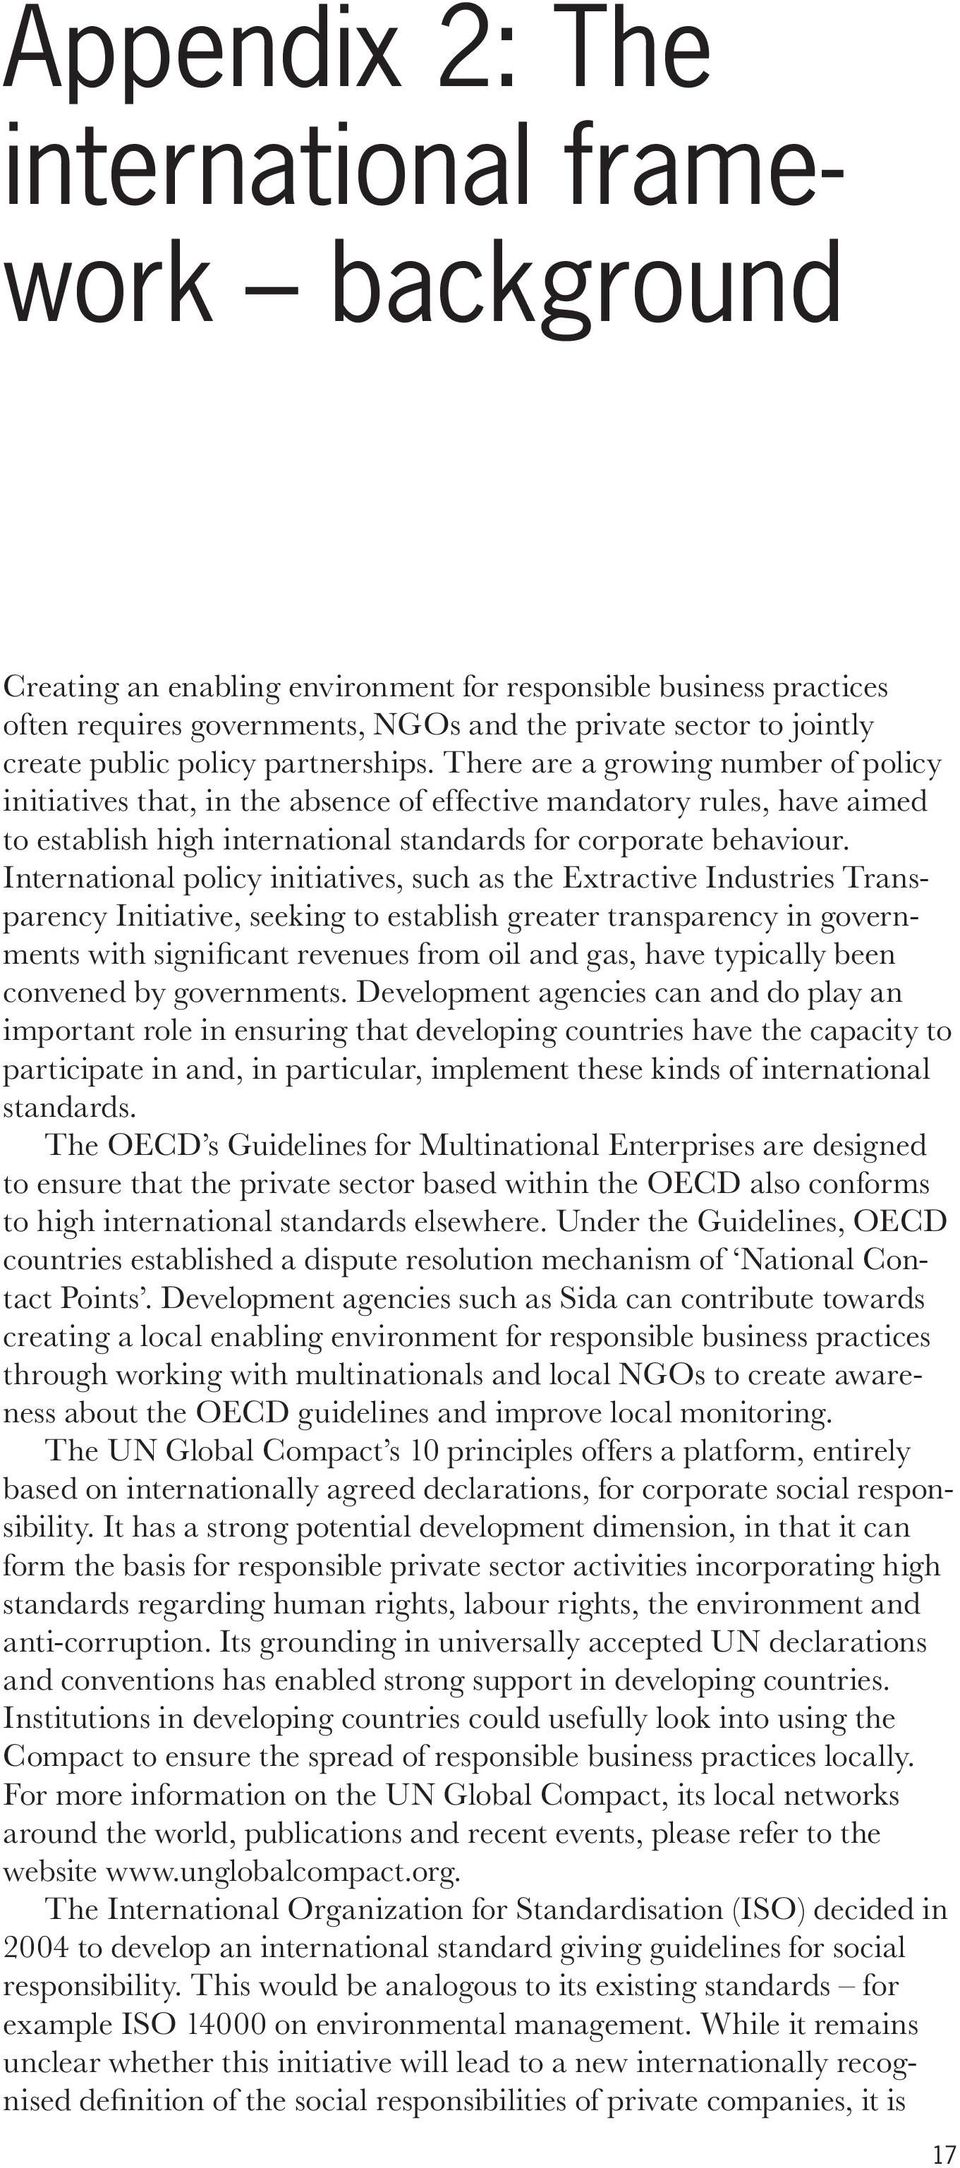 International policy initiatives, such as the Extractive Industries Transparency Initiative, seeking to establish greater transparency in governments with significant revenues from oil and gas, have